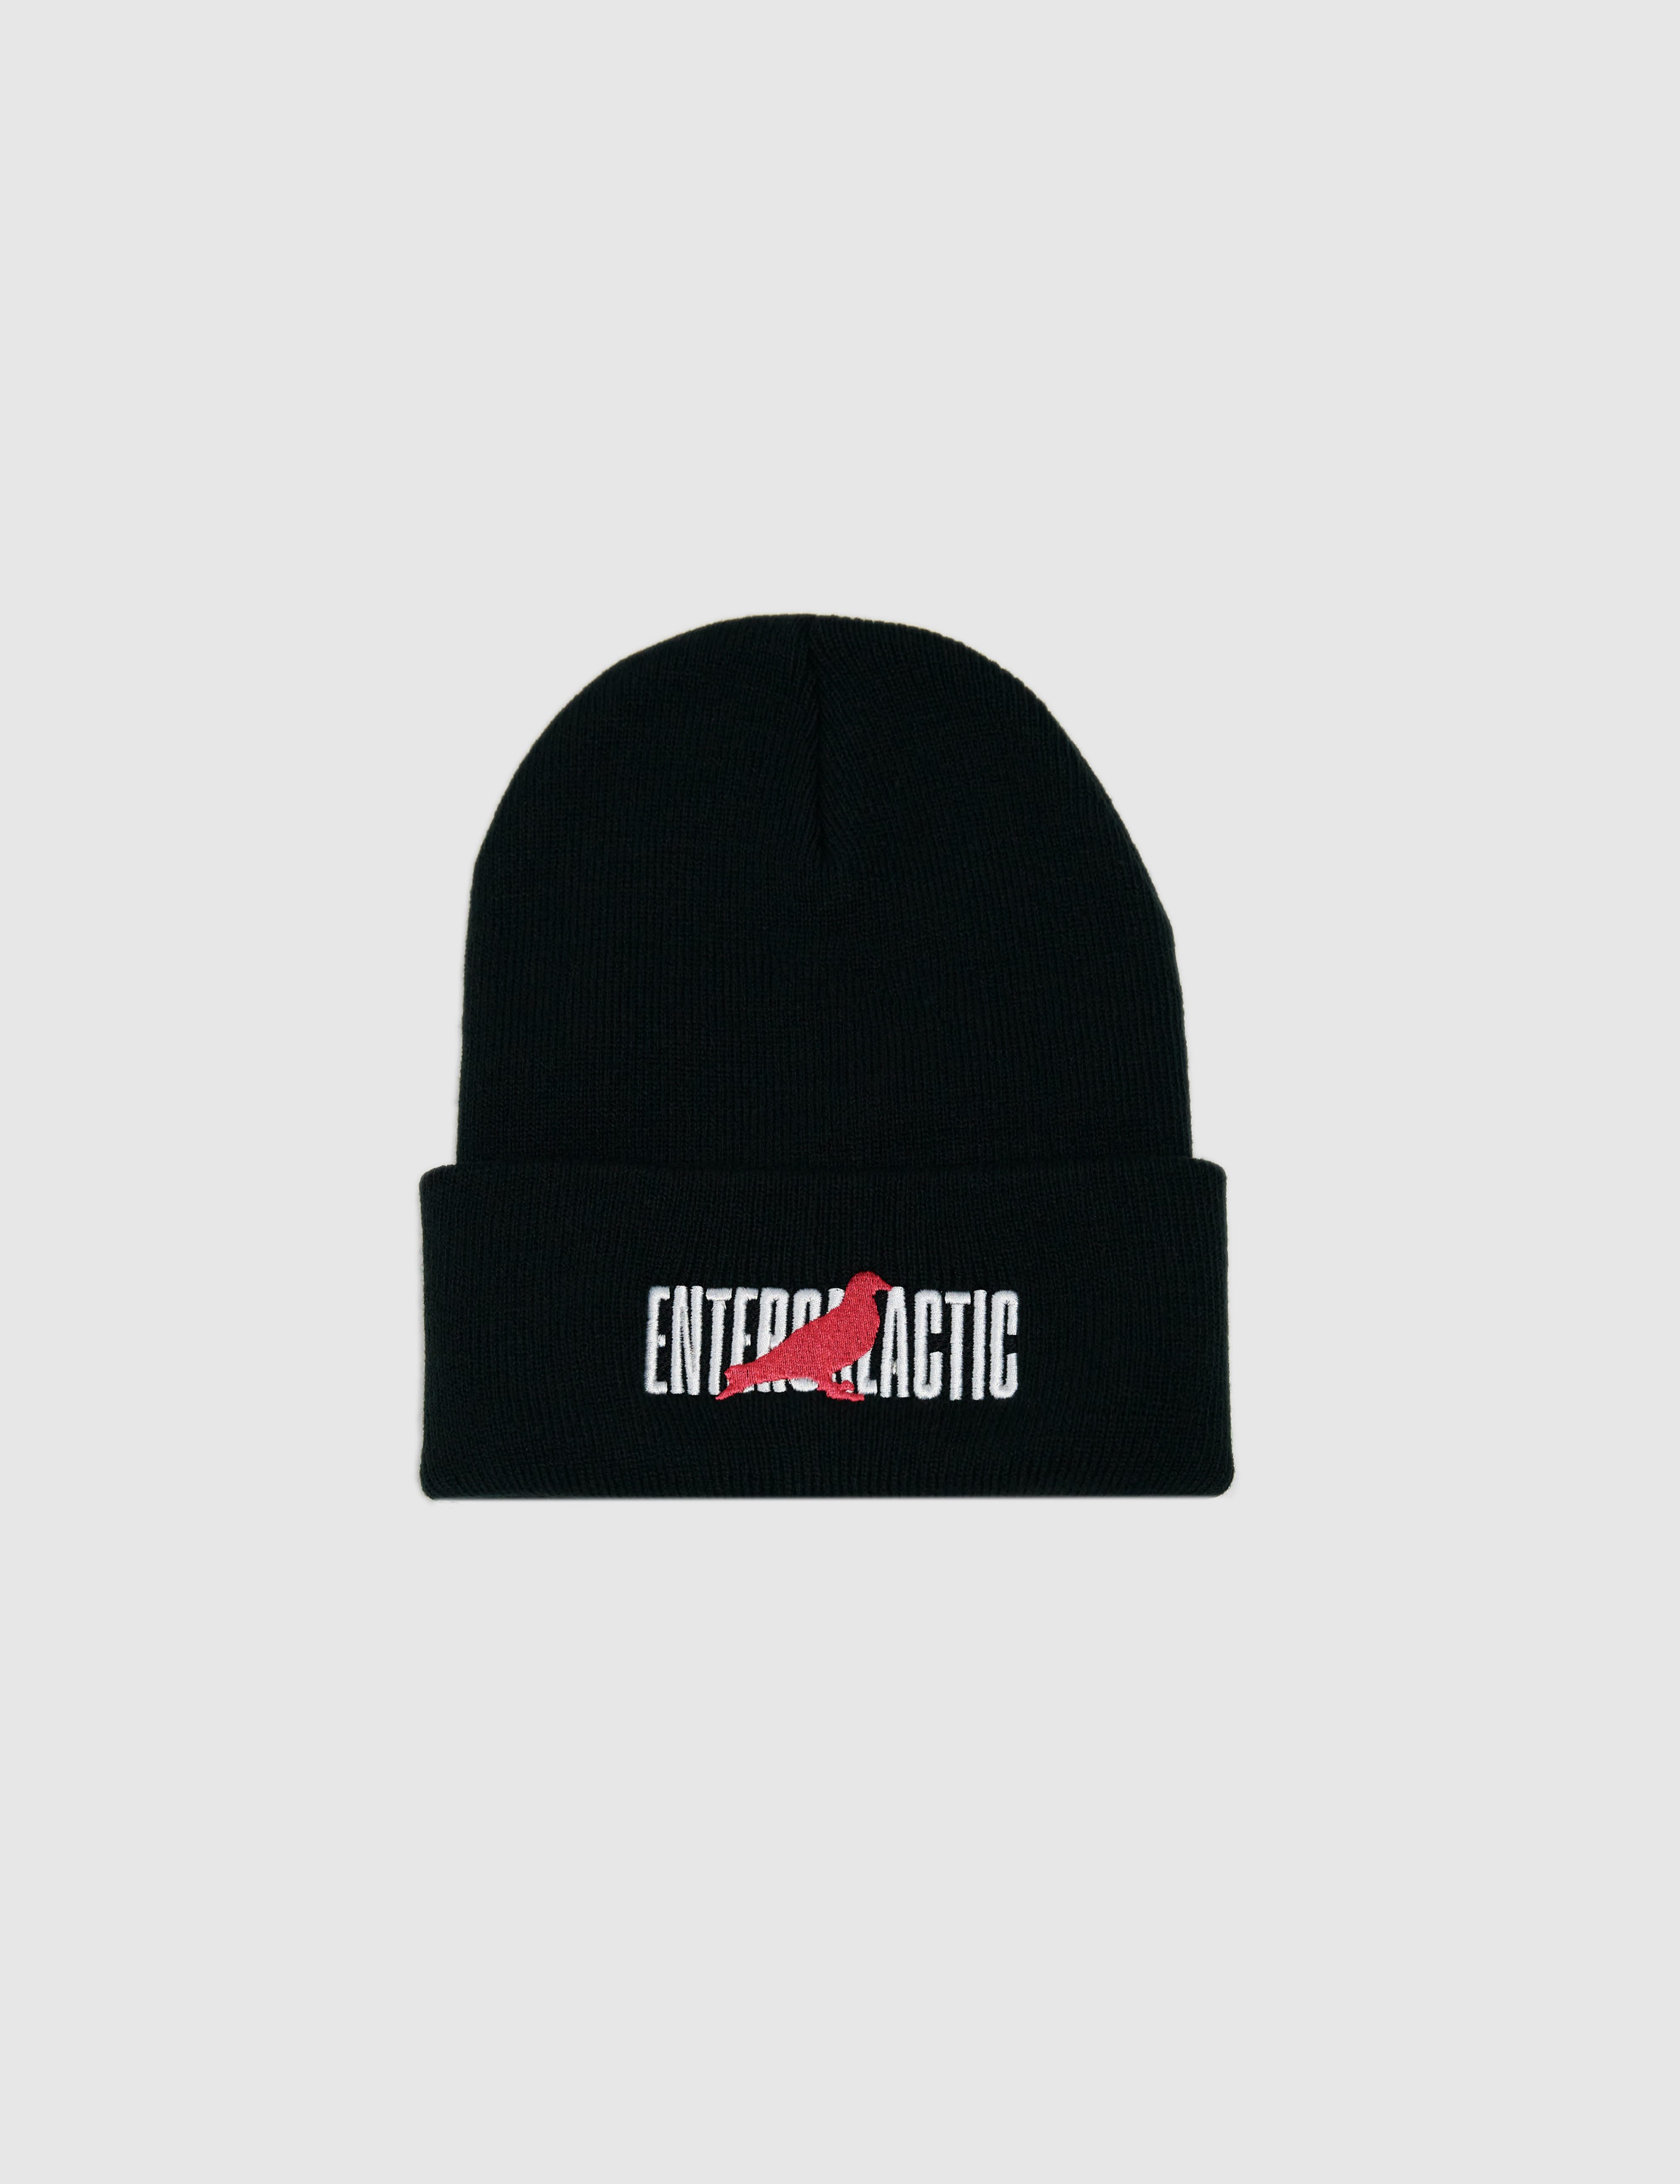 A beanie from Staple is shown